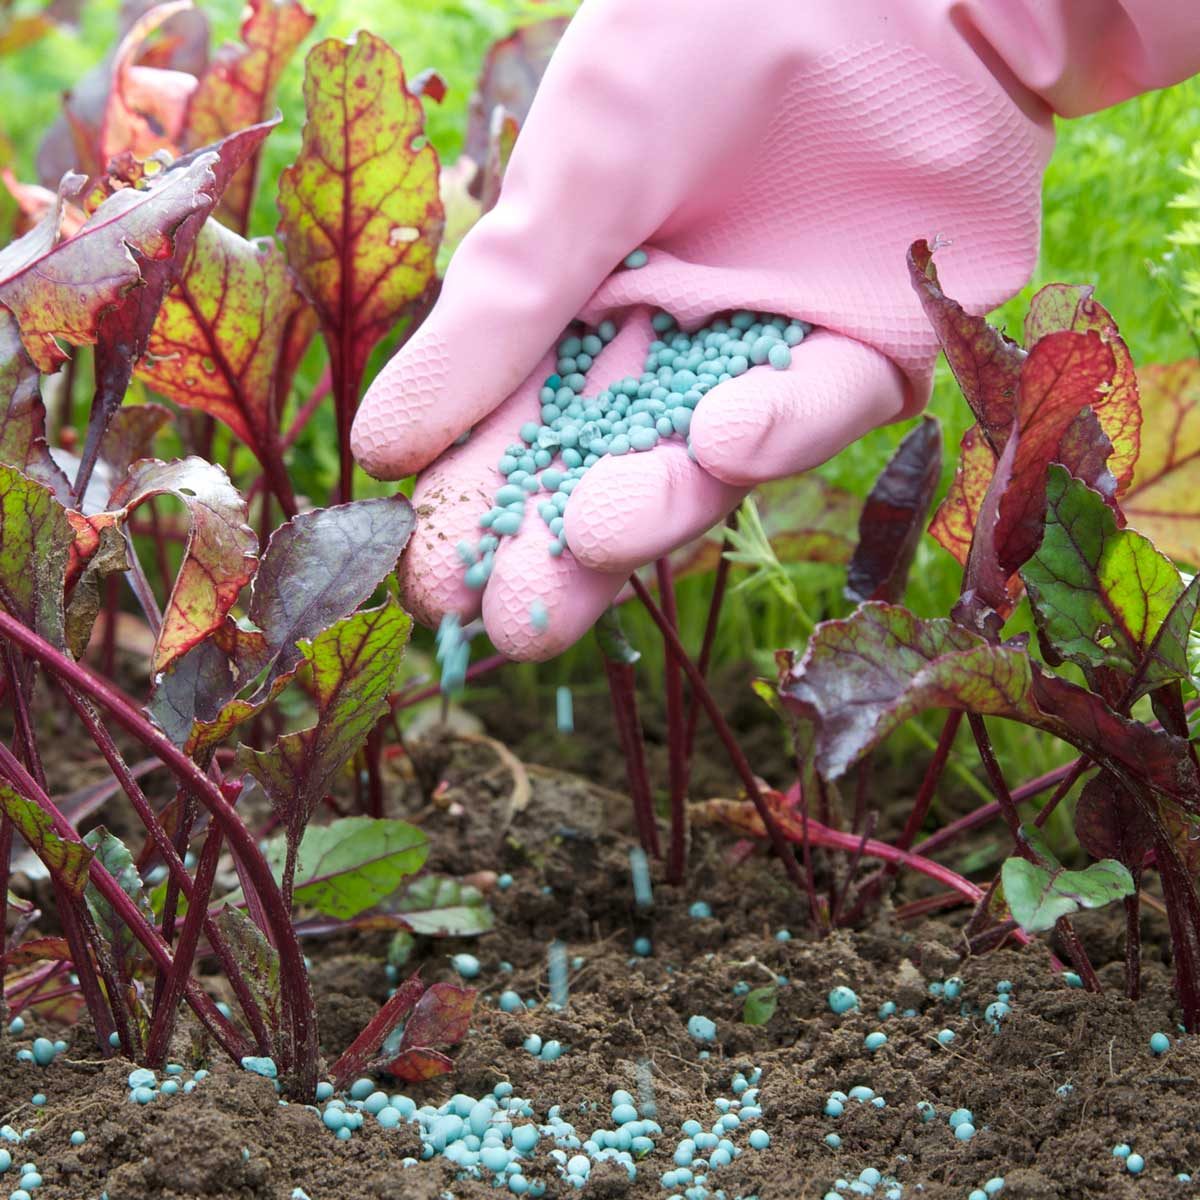 The 9 Best Garden Fertilizers You Can Get, According to a Horticulturist